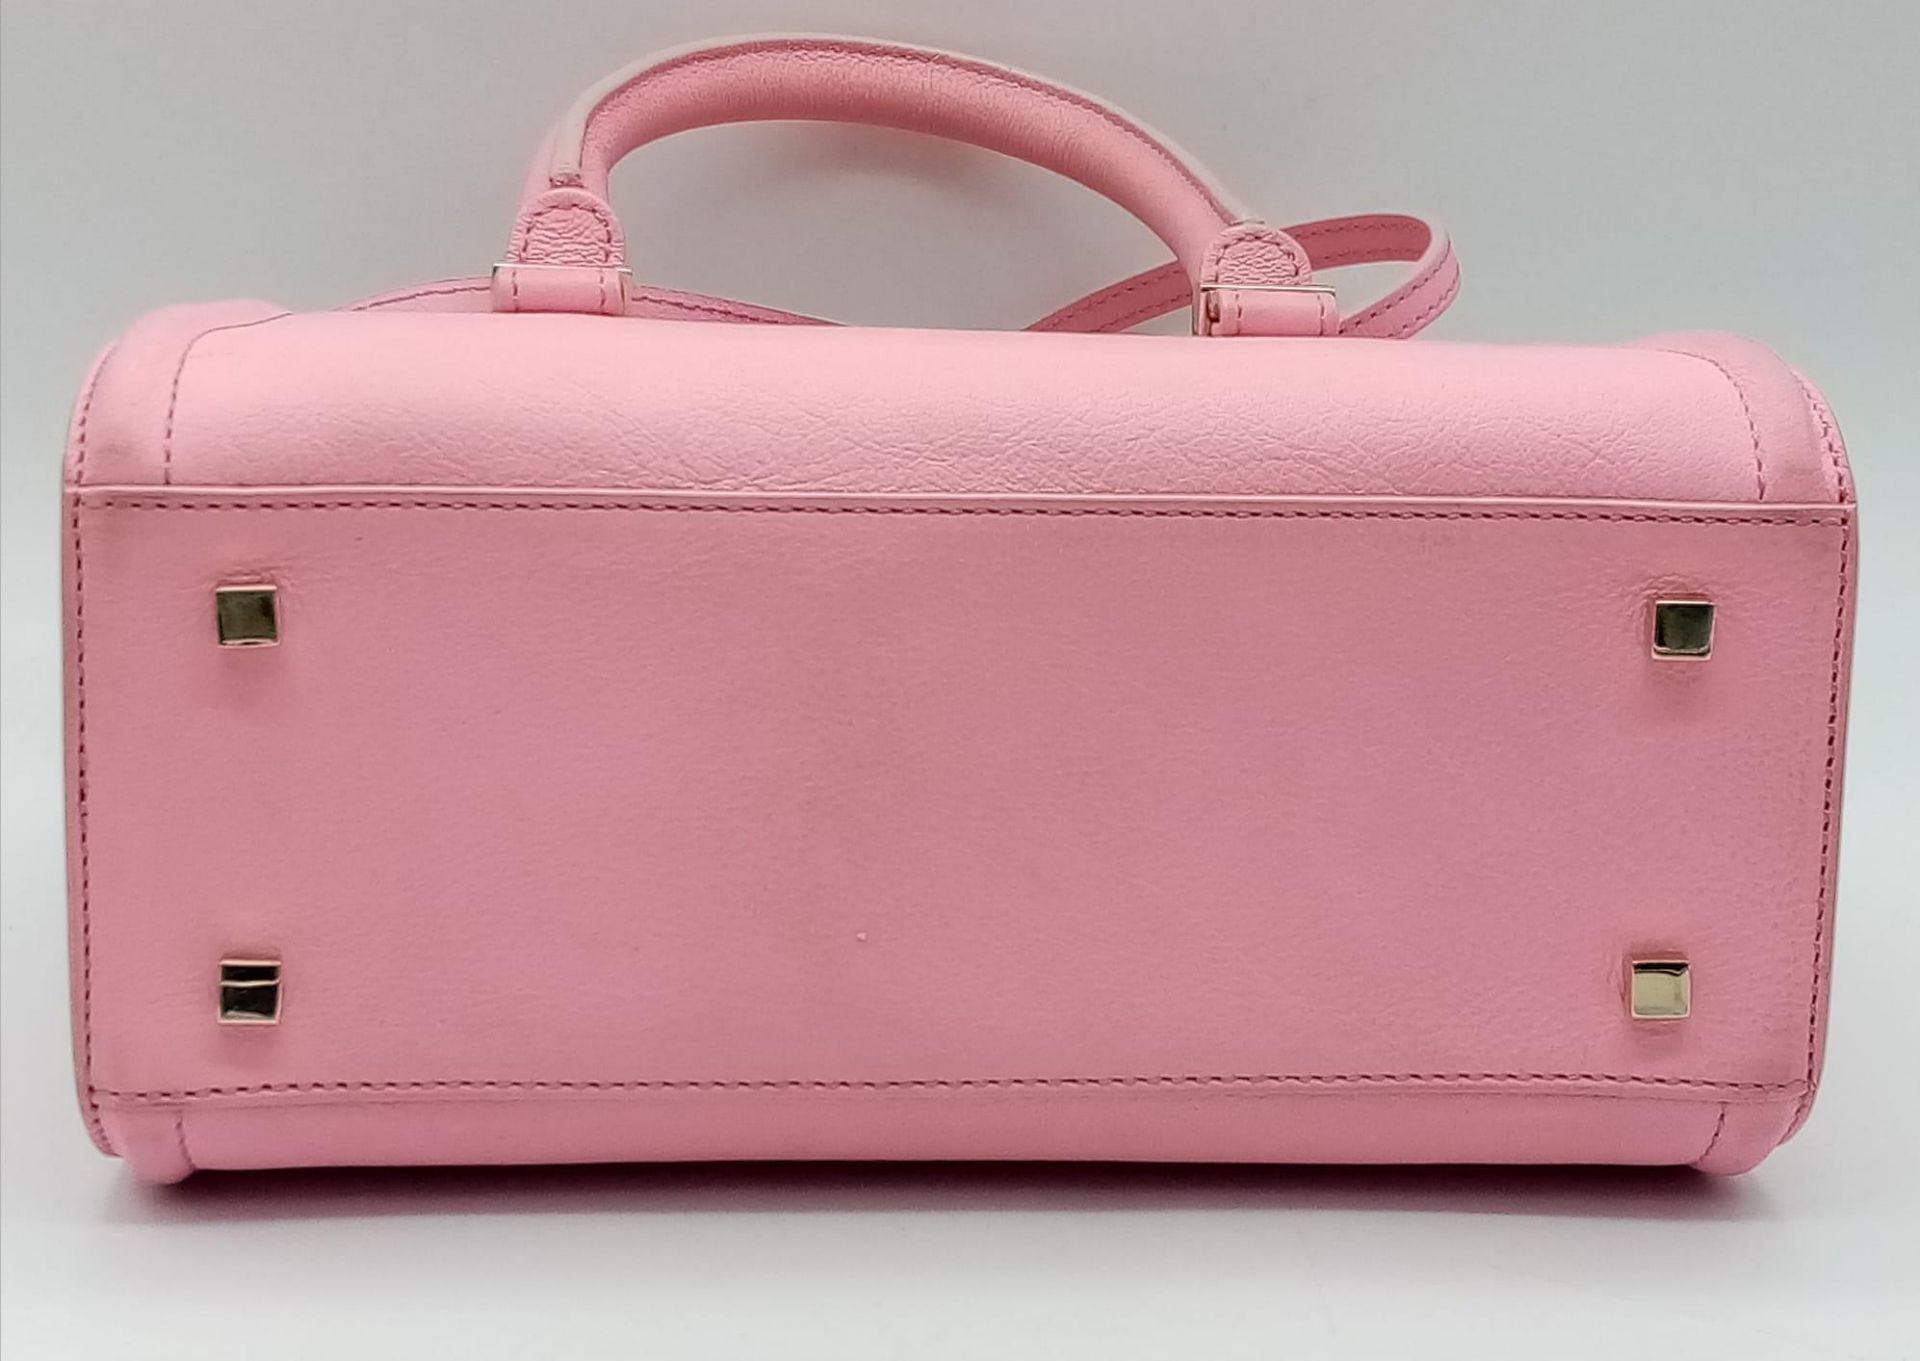 A Victoria Beckham two toned candy pink textured leather mini bag, patent leather trim with gold - Image 4 of 8